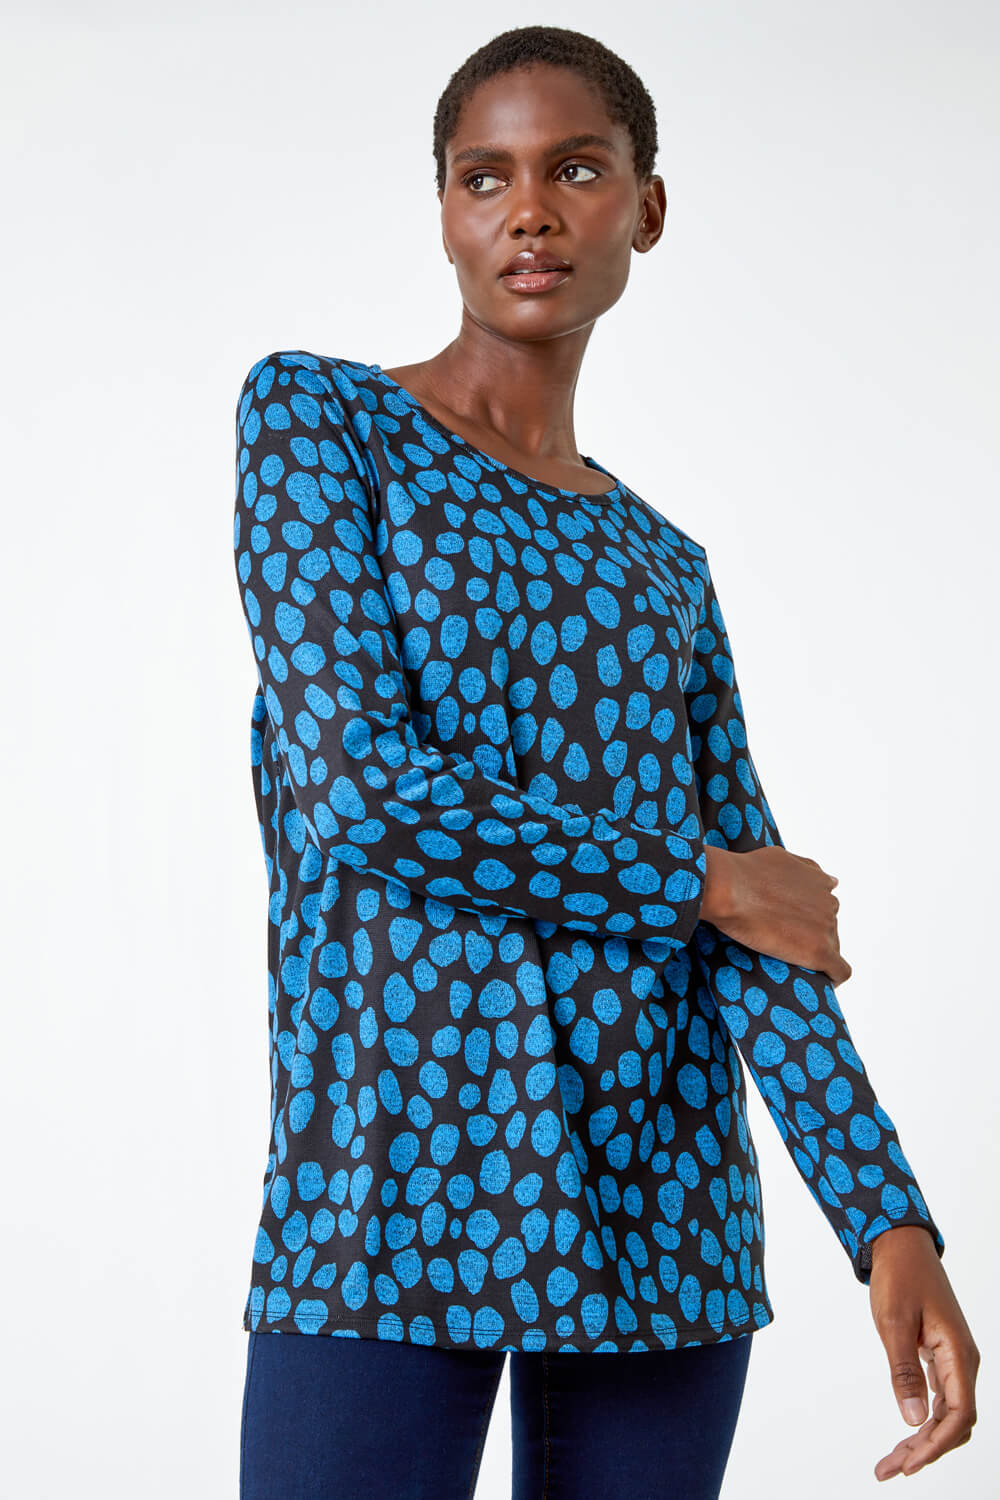 Blue Spot Print Tunic Top and Scarf, Image 4 of 5